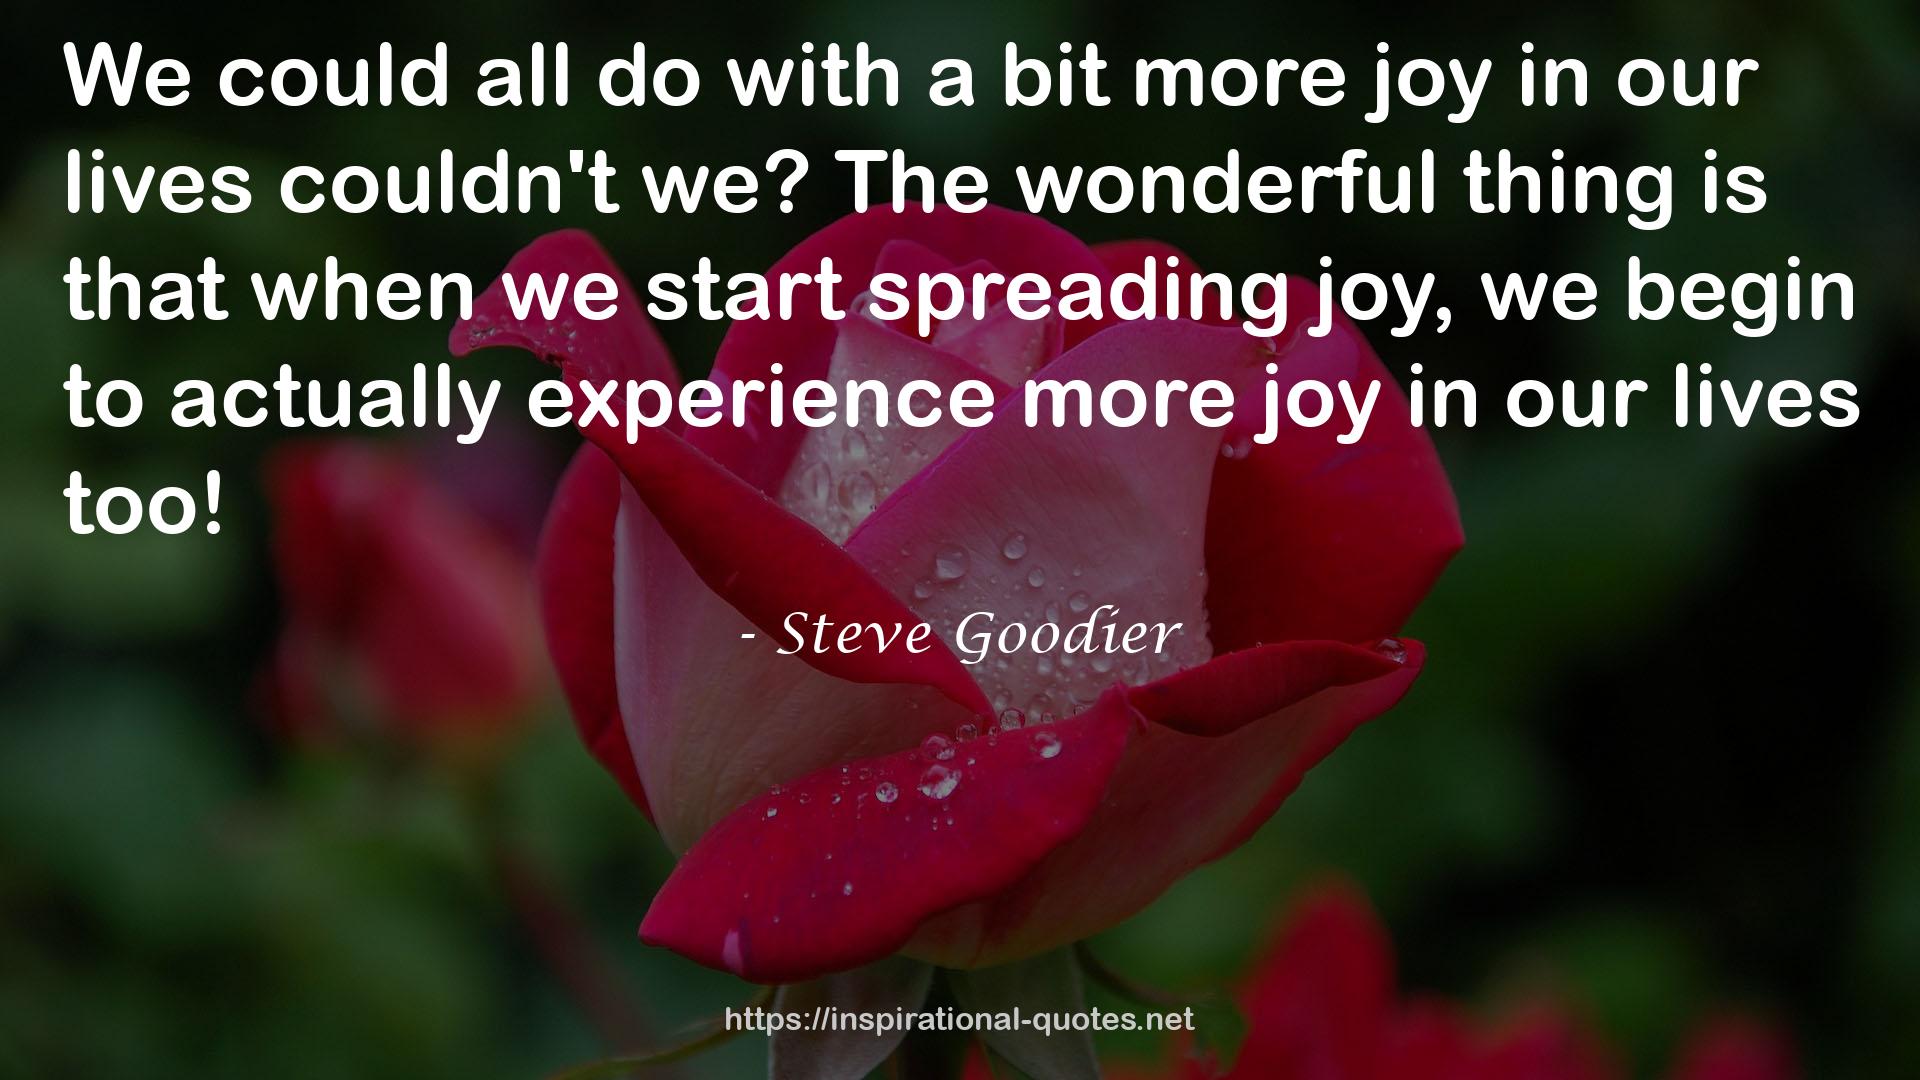 Steve Goodier QUOTES